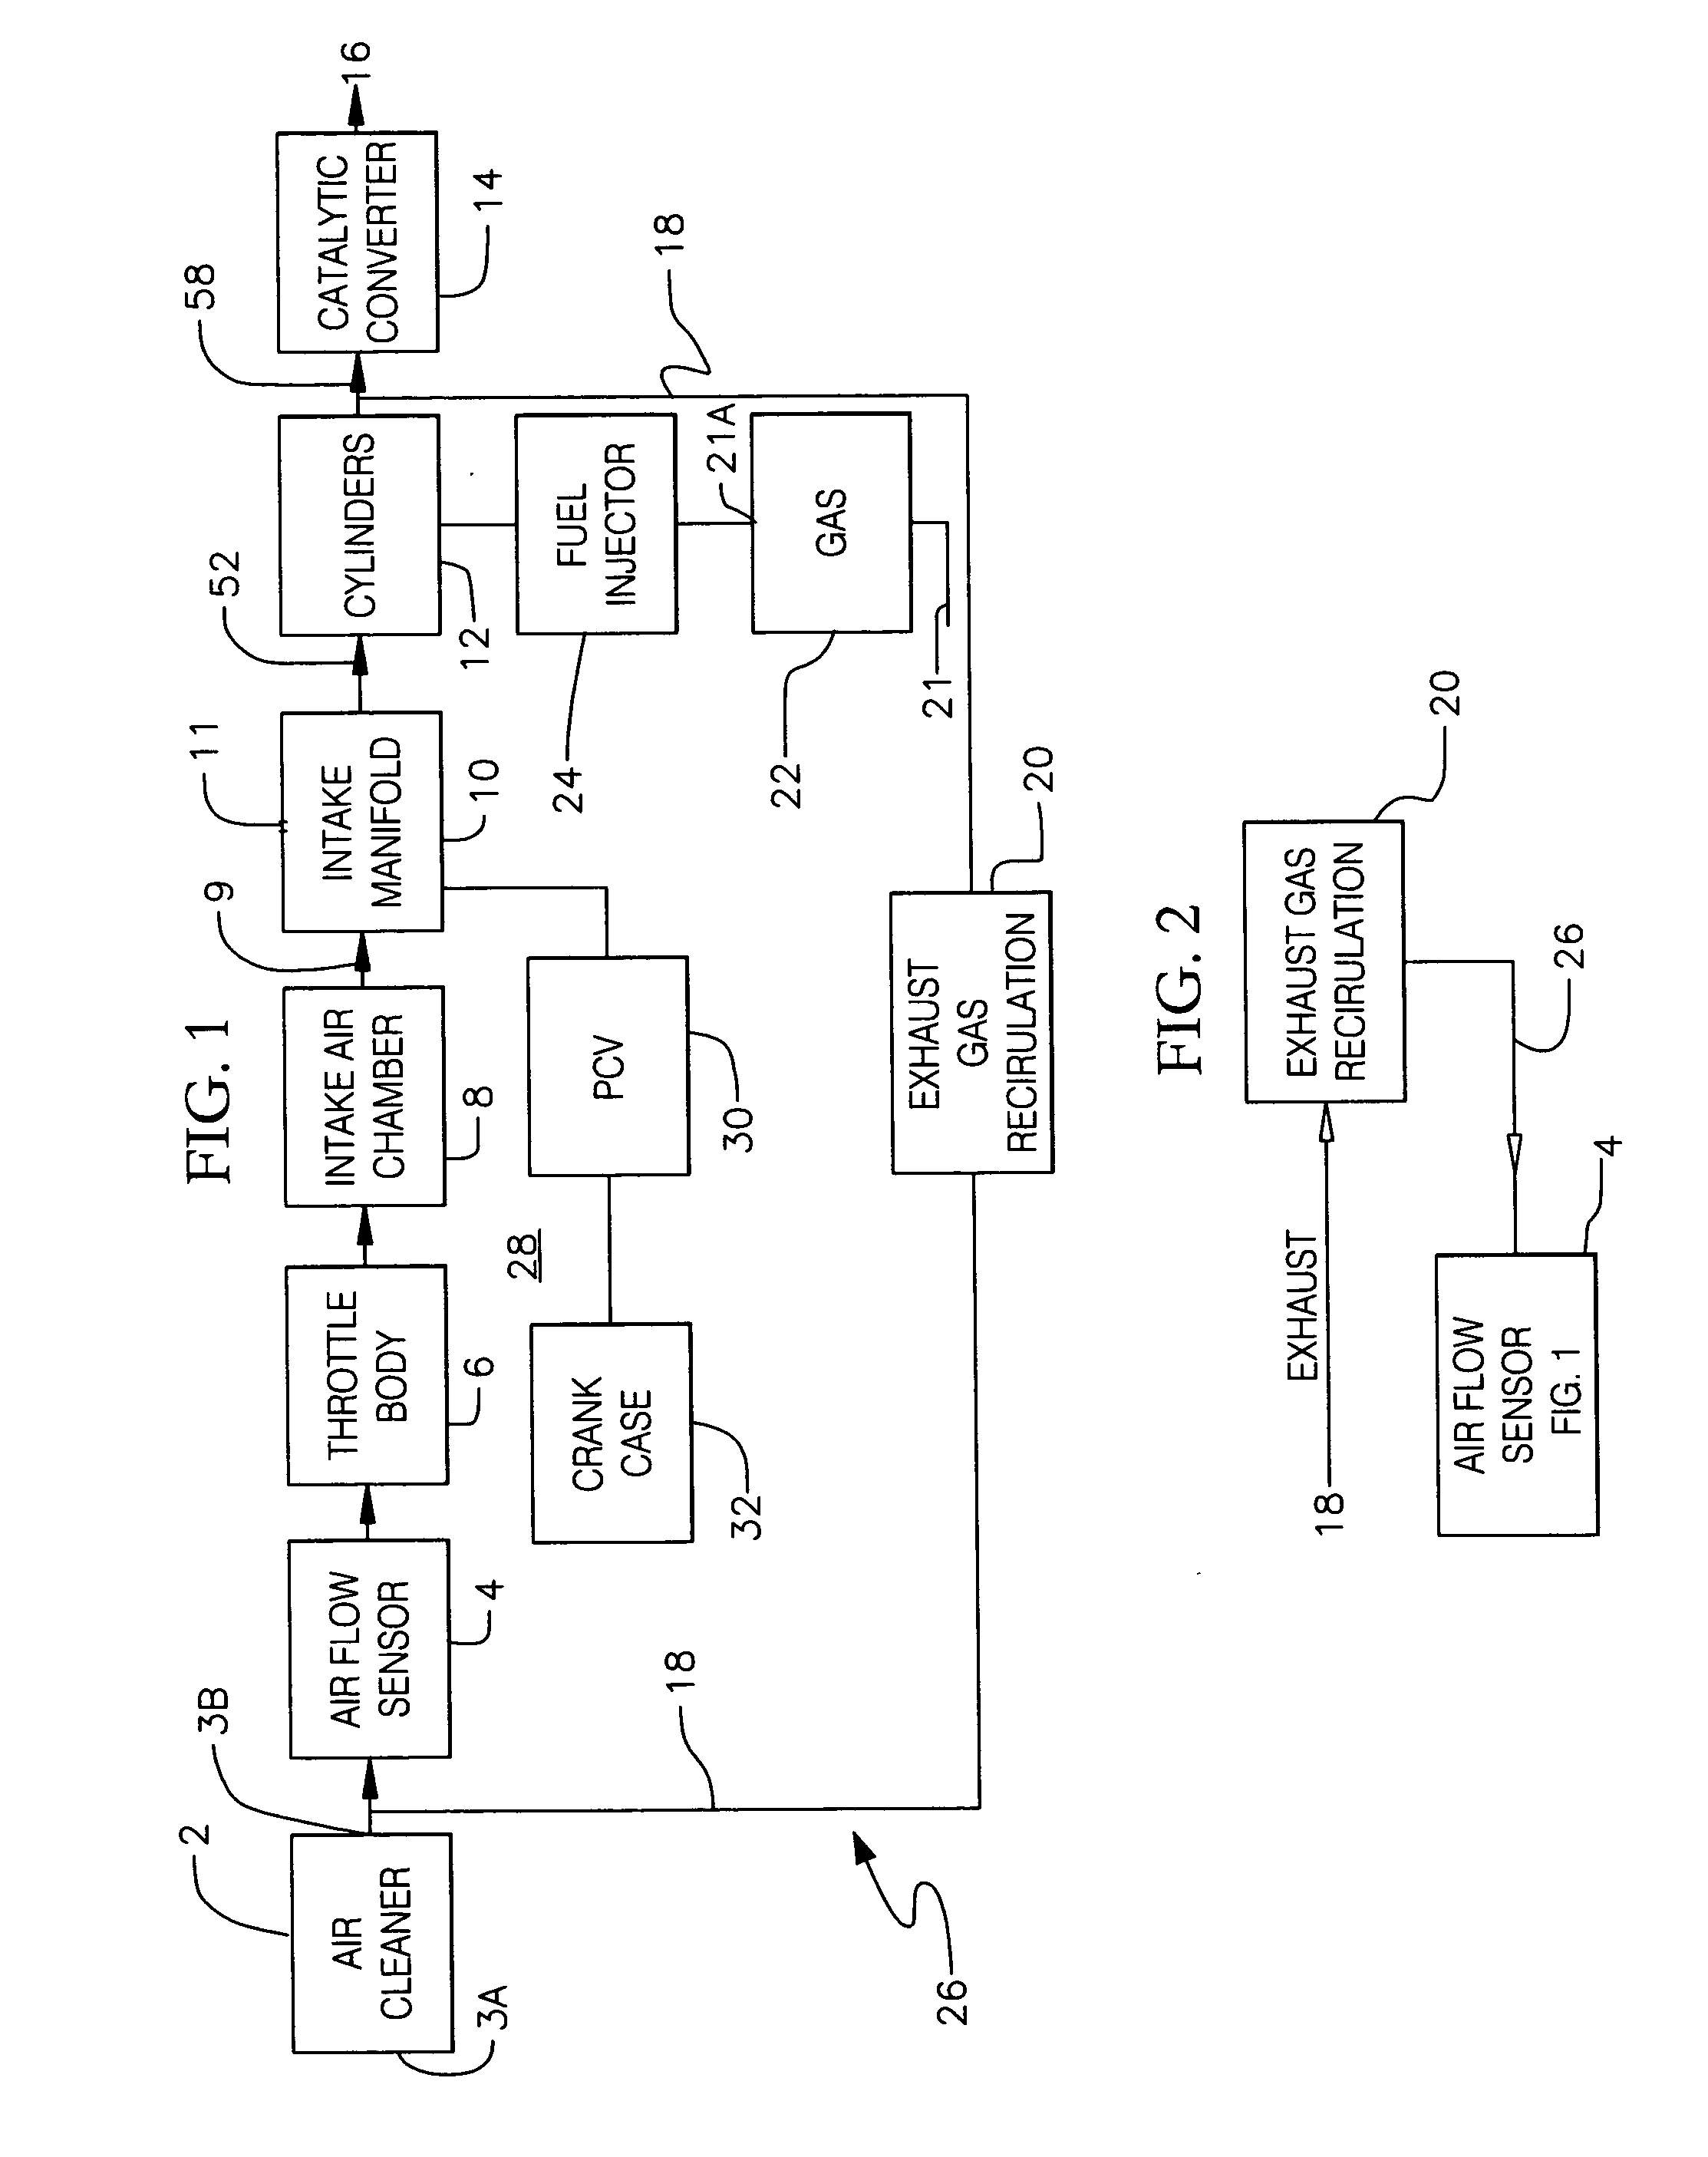 Bulk supply apparatus and method for cleaning a combustion engine system